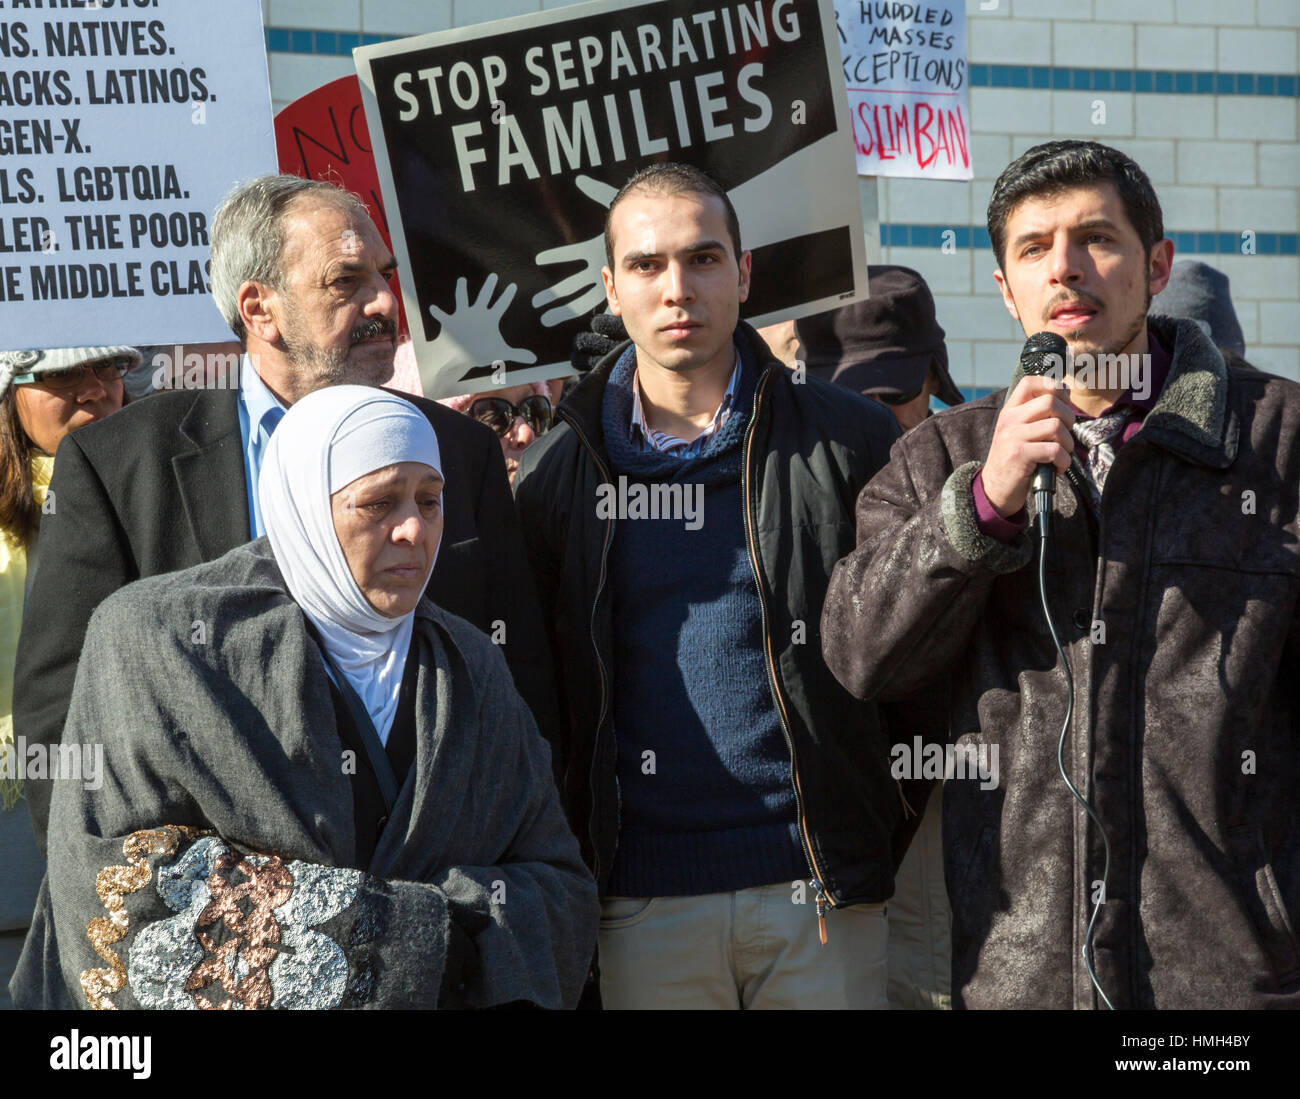 Bloomfield Hills, USA. 3rd February, 2017. Interfaith religious leaders rally during Friday prayers at the Muslim Unity Center in solidarity with the Muslim community and against the Trump administration's immigration/refugee ban. Syrian refugees, whose family was separated by the ban, spoke through a translator (right). Credit: Jim West/Alamy Live News Stock Photo